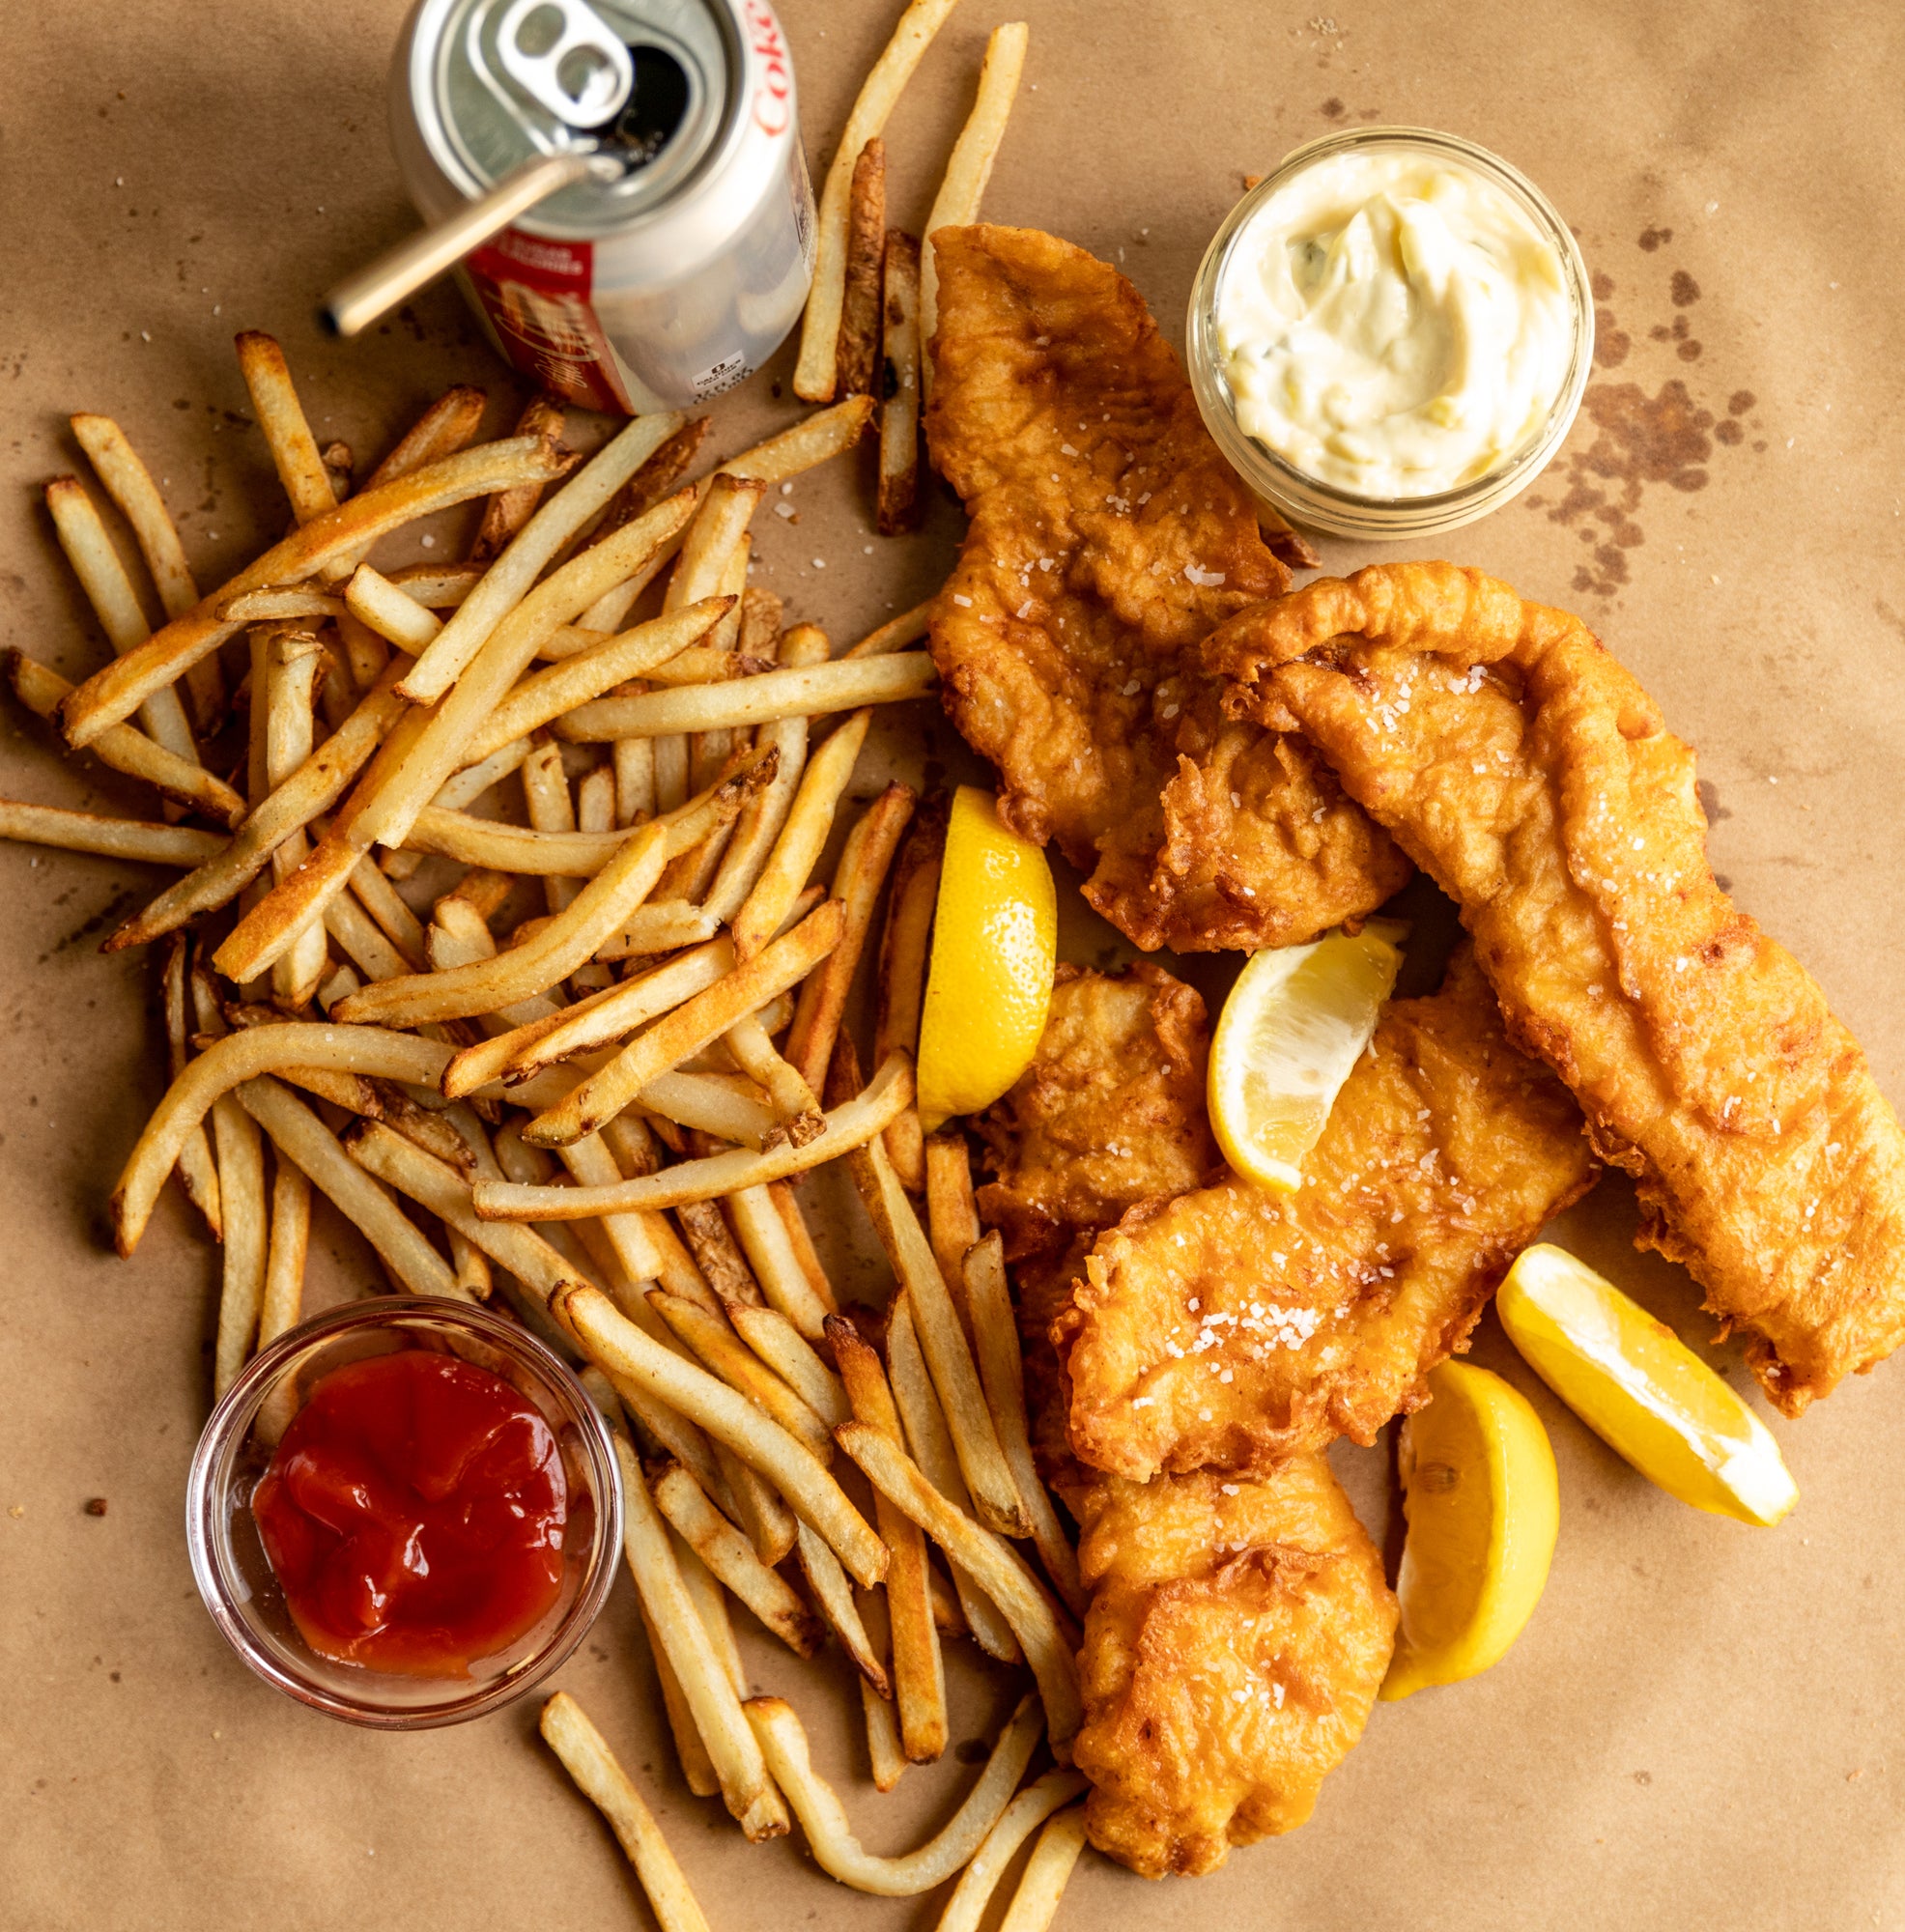 4 Fish to Try During National Seafood Month